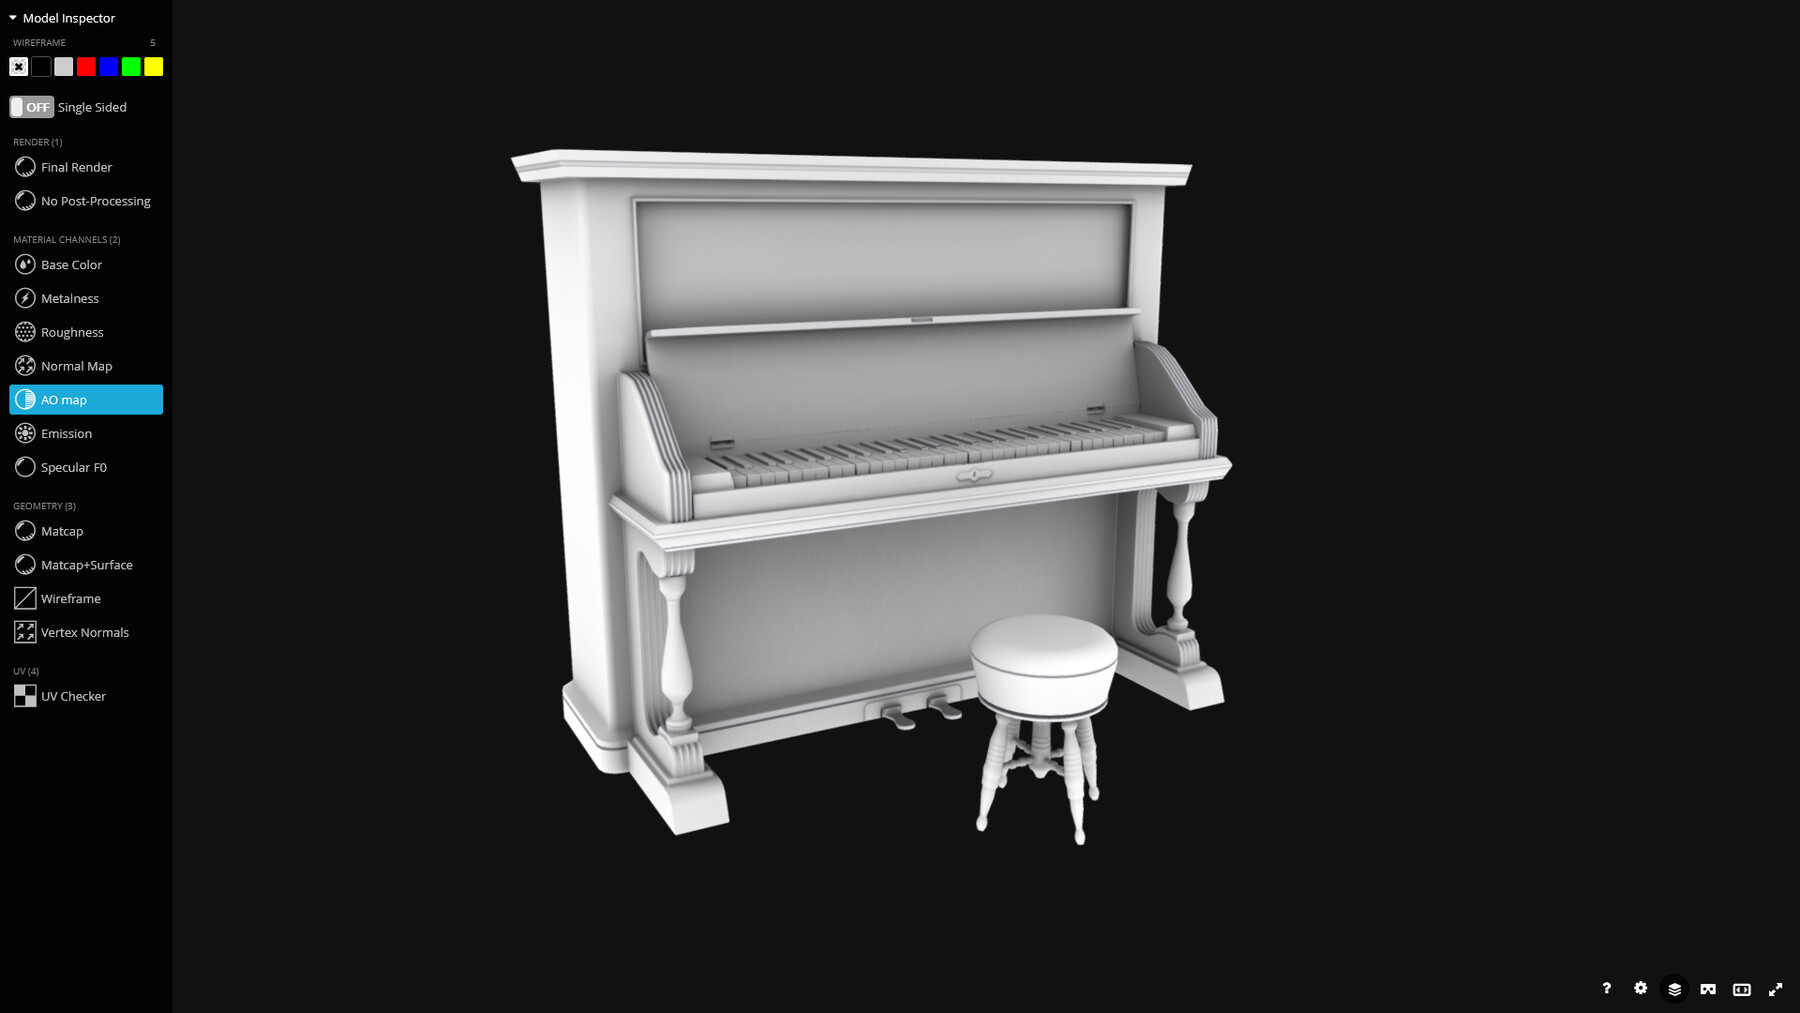 White grand piano 3d model 3ds max files free download - modeling